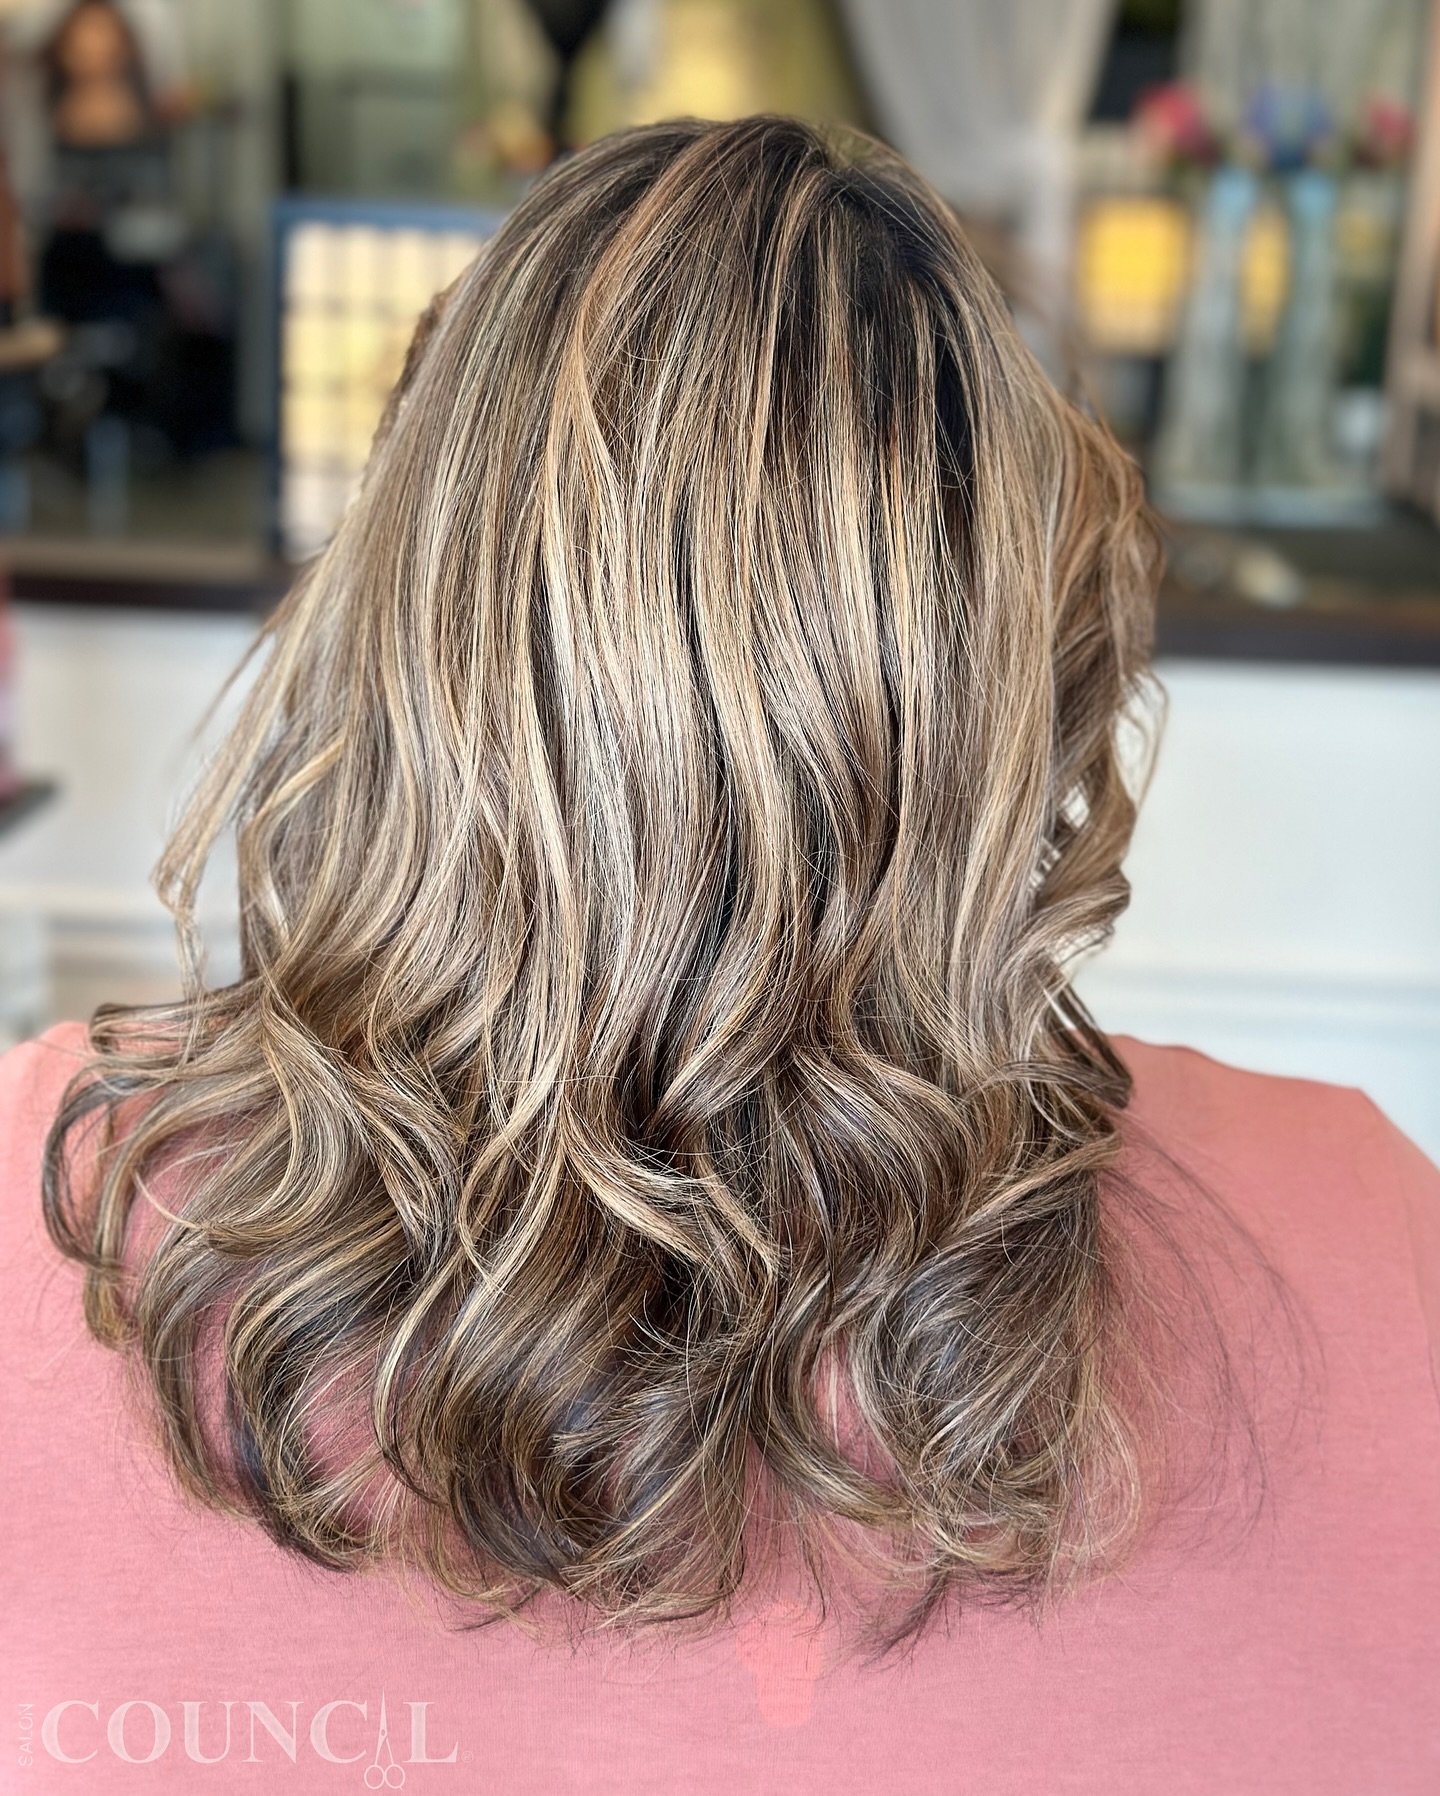 🎉#dimensionalcolor 
Elevate your look with a natural dimensional blonde balayage, perfect full toner, transformative Olaplex treatment, and a chic layered haircut styled with a blowdry! 
🪄Absolute hair magic! #DimensionalBlonde #StylishCuts

BALAYA